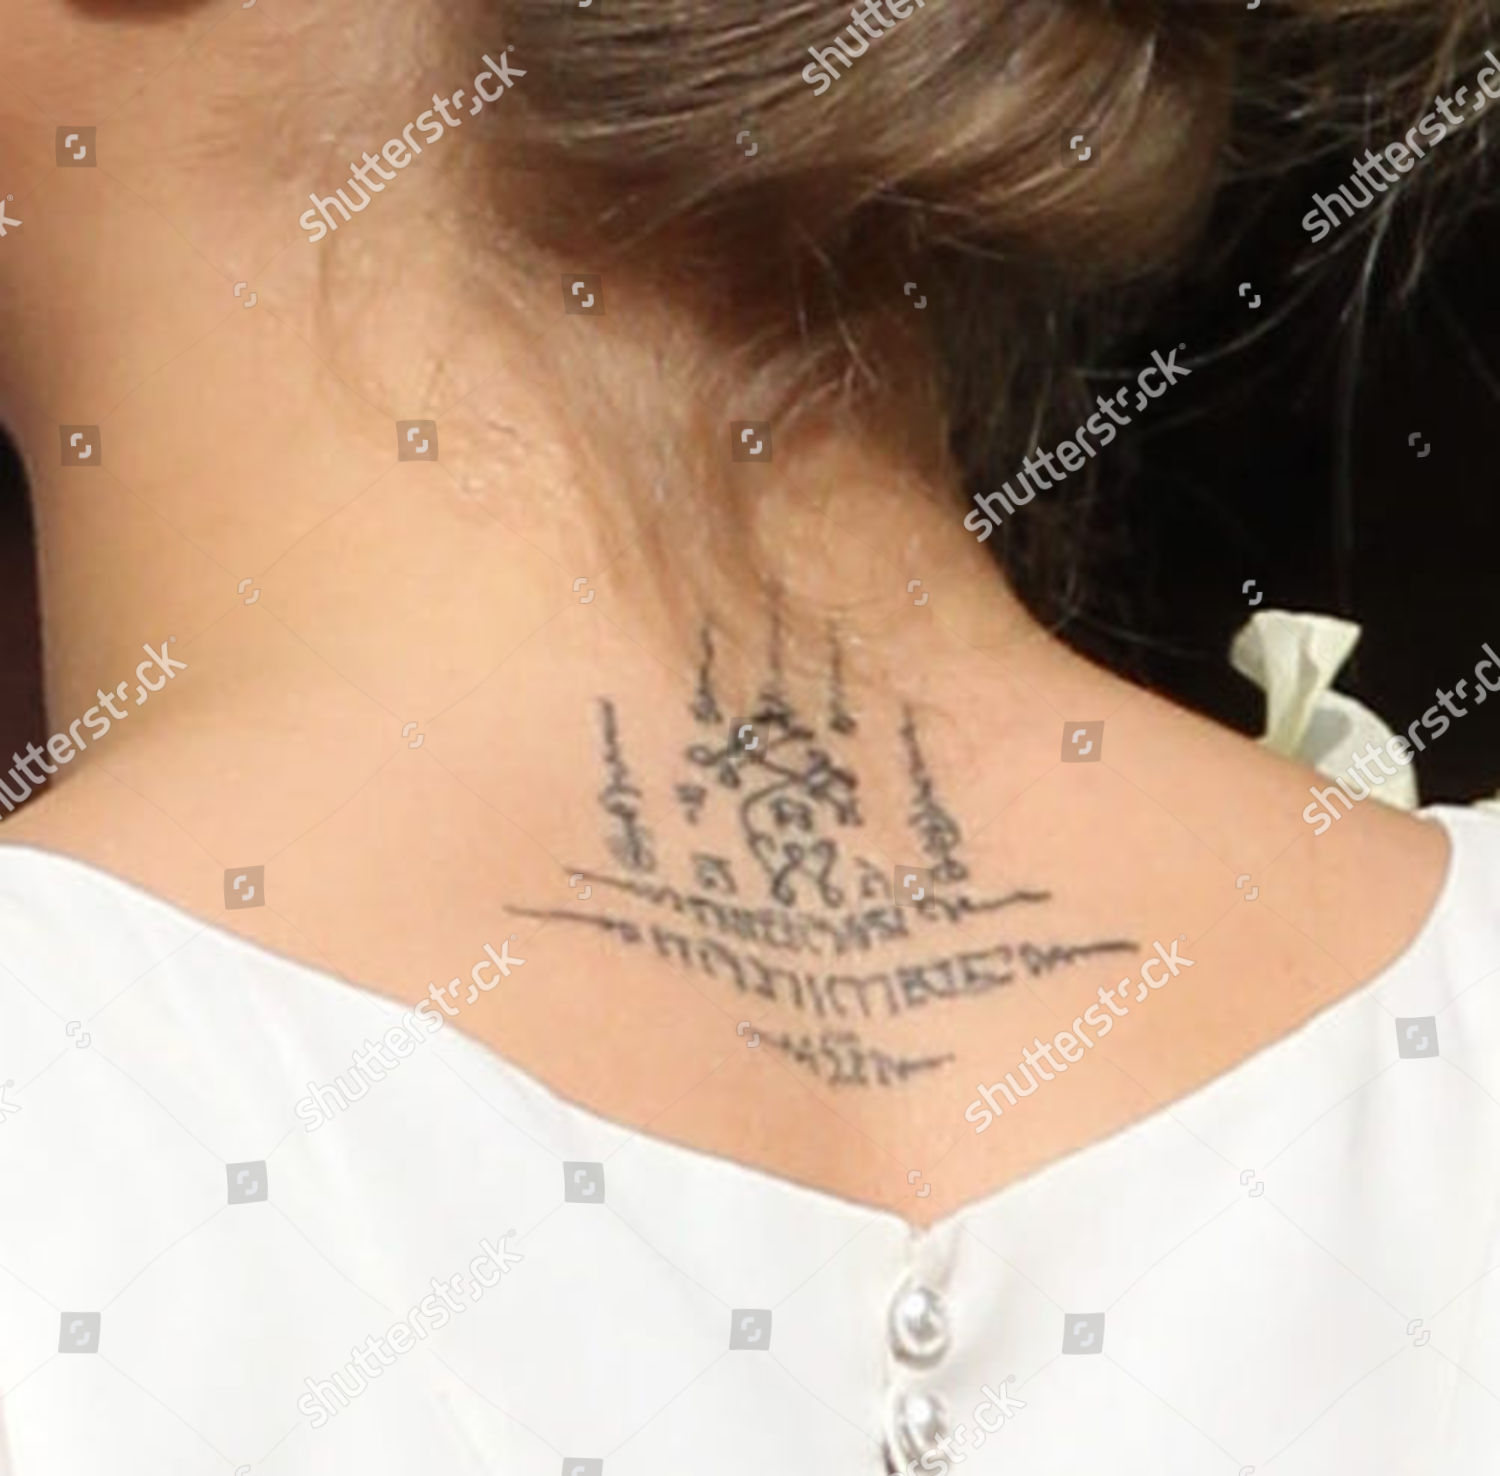 Cara Delevingne Has CJD Tattoo Thats Her Initials Not Because She Has  Mad Cow Disease PICTURES  HuffPost UK Entertainment